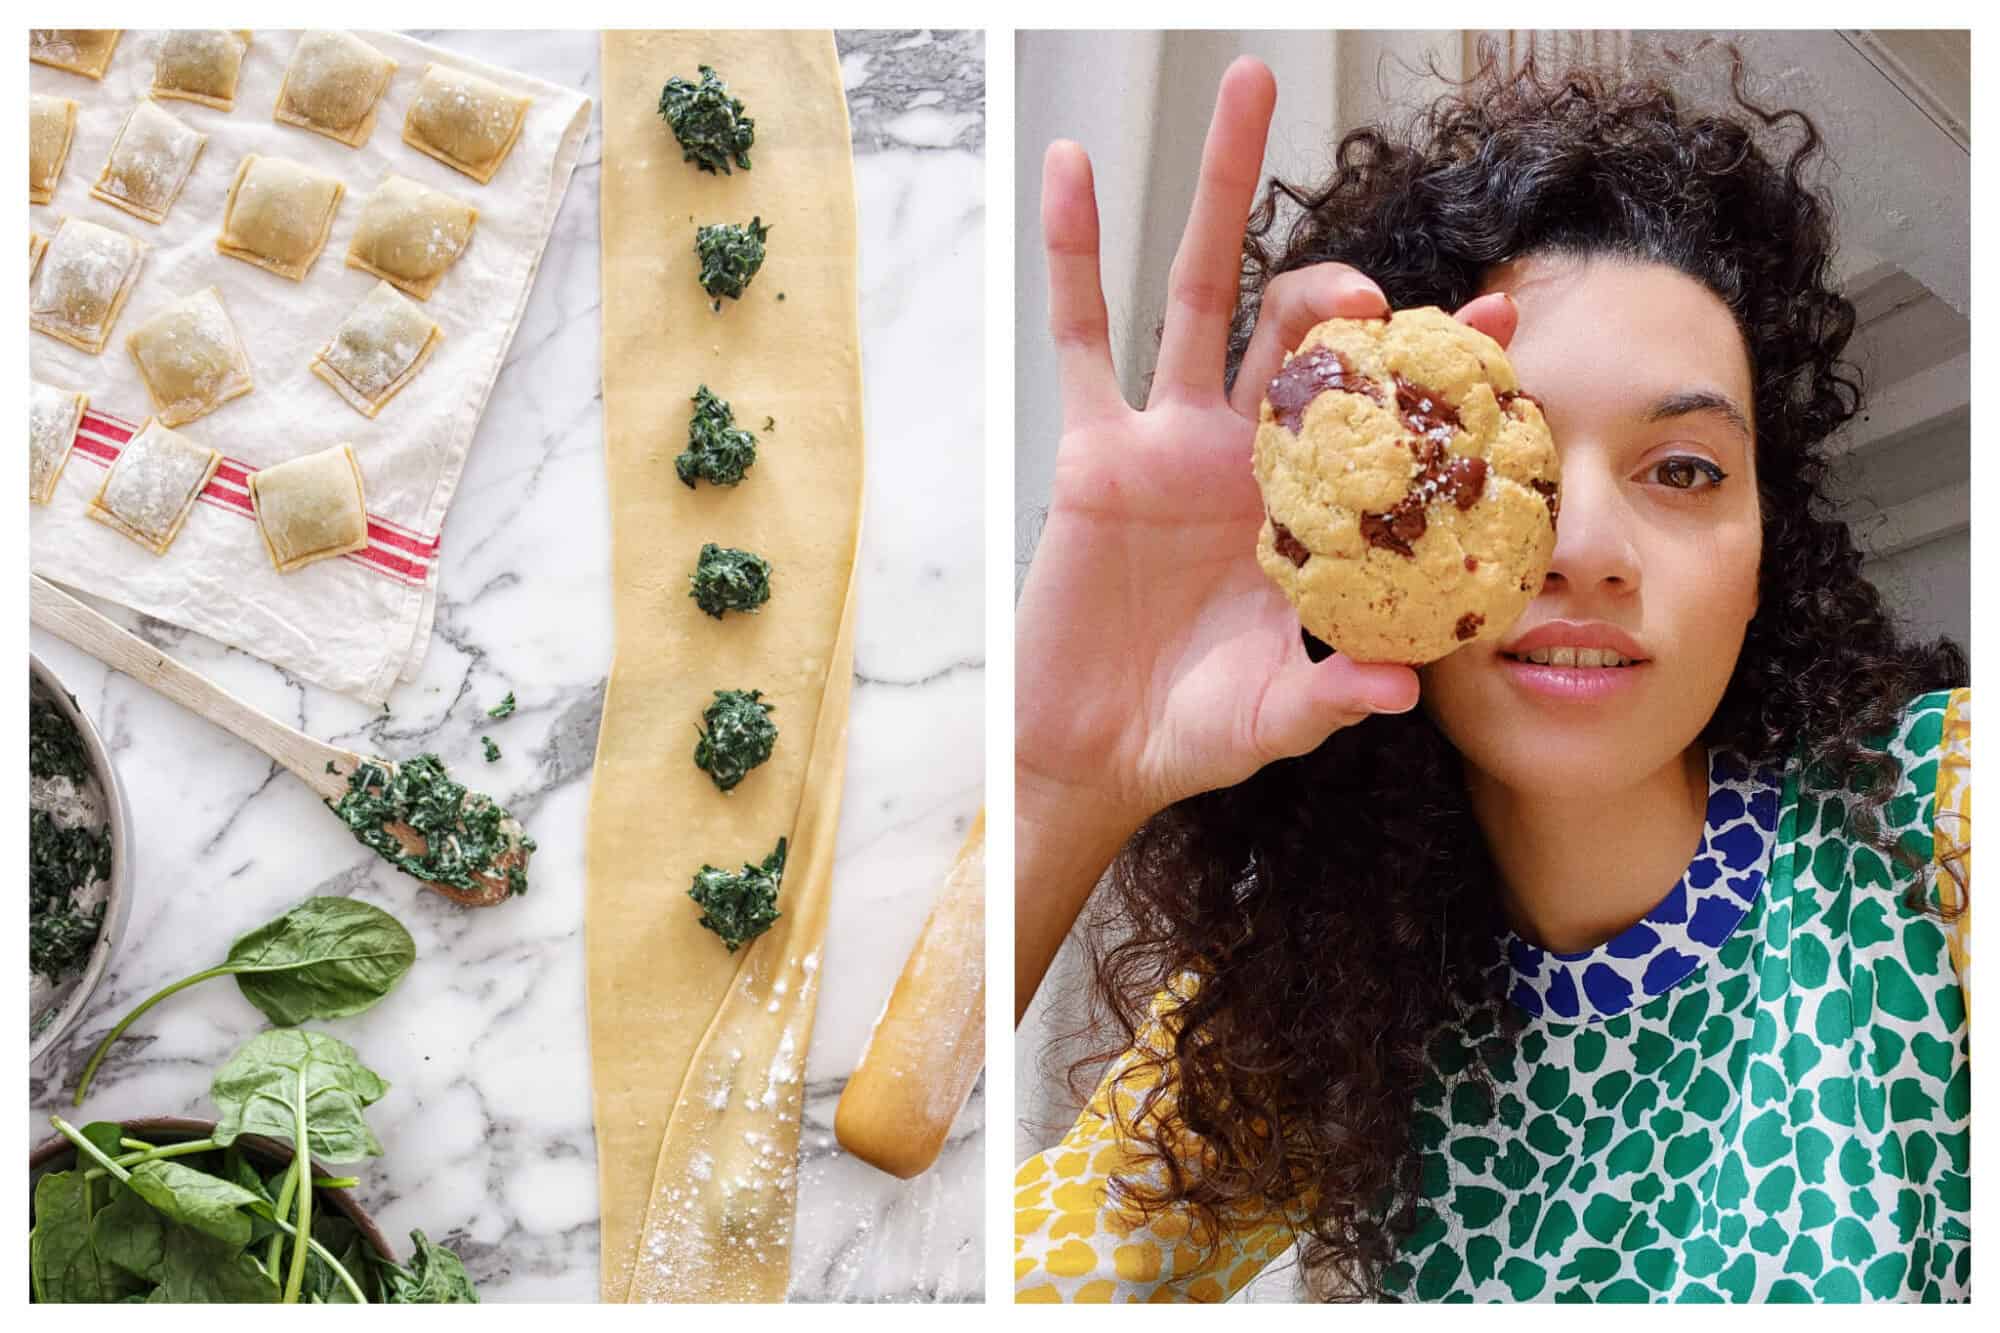 Left: the making of spinach ravioli. A sheet of pasta is on a marble background, with spoonfuls of spinach filling placed along it. To the left is a tea towel with some already made raviolis. 
Right: a brunette curly-haired woman holding a chocolate chip biscuit in front of her eye. She's wearing a green, blue and yellow patterned top. 